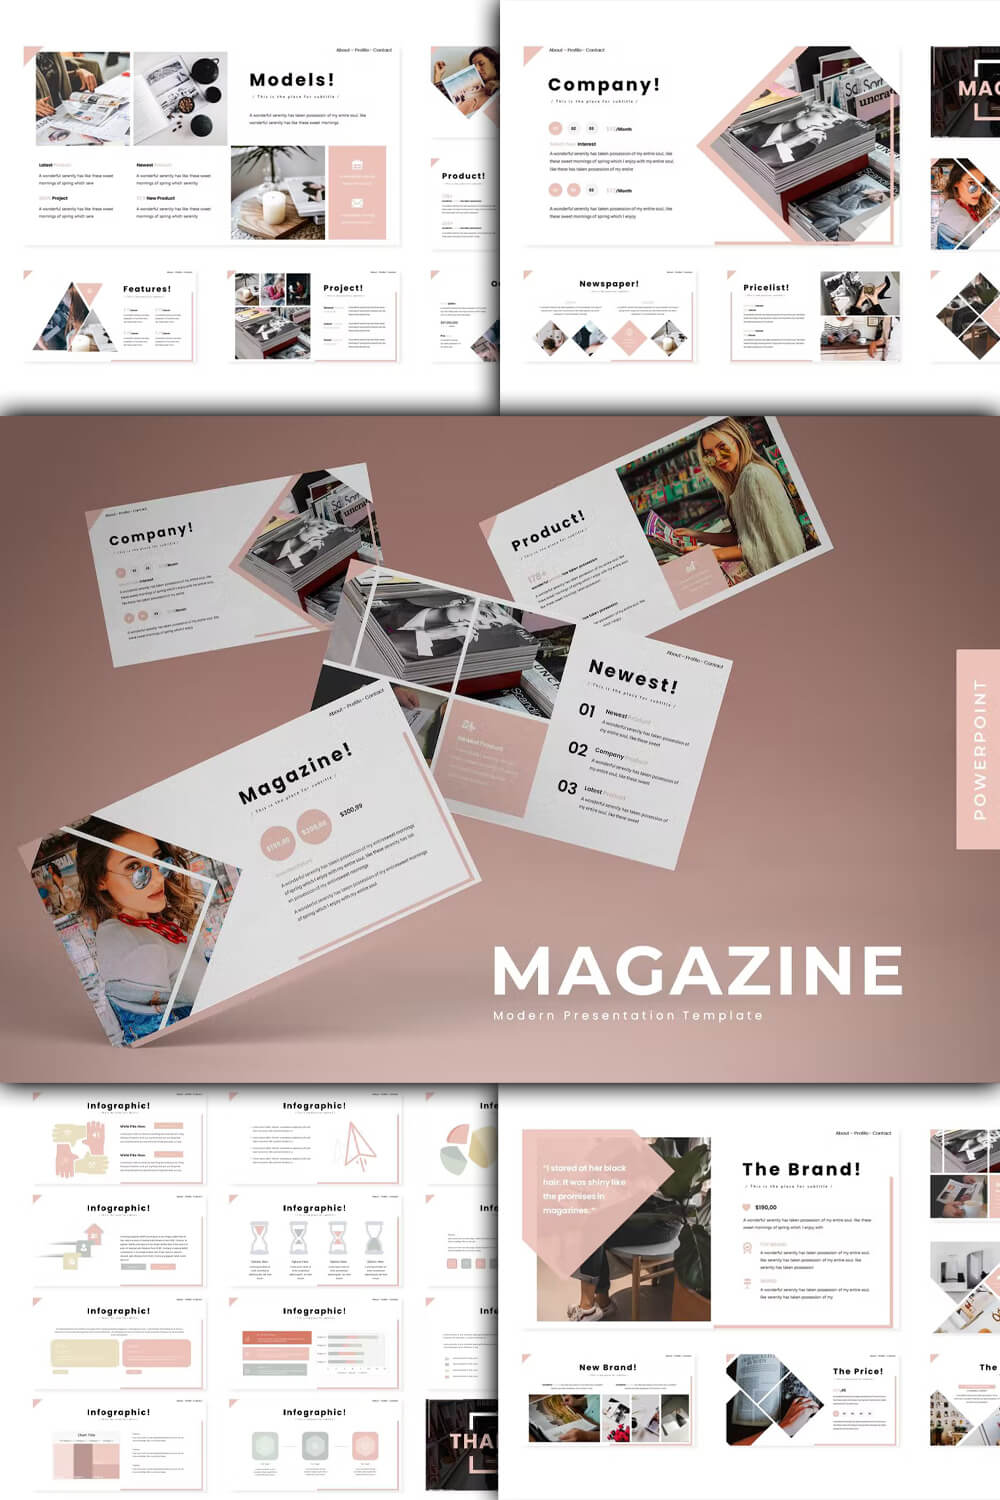 Powerpoint magazine template - 4 pages and a cover.